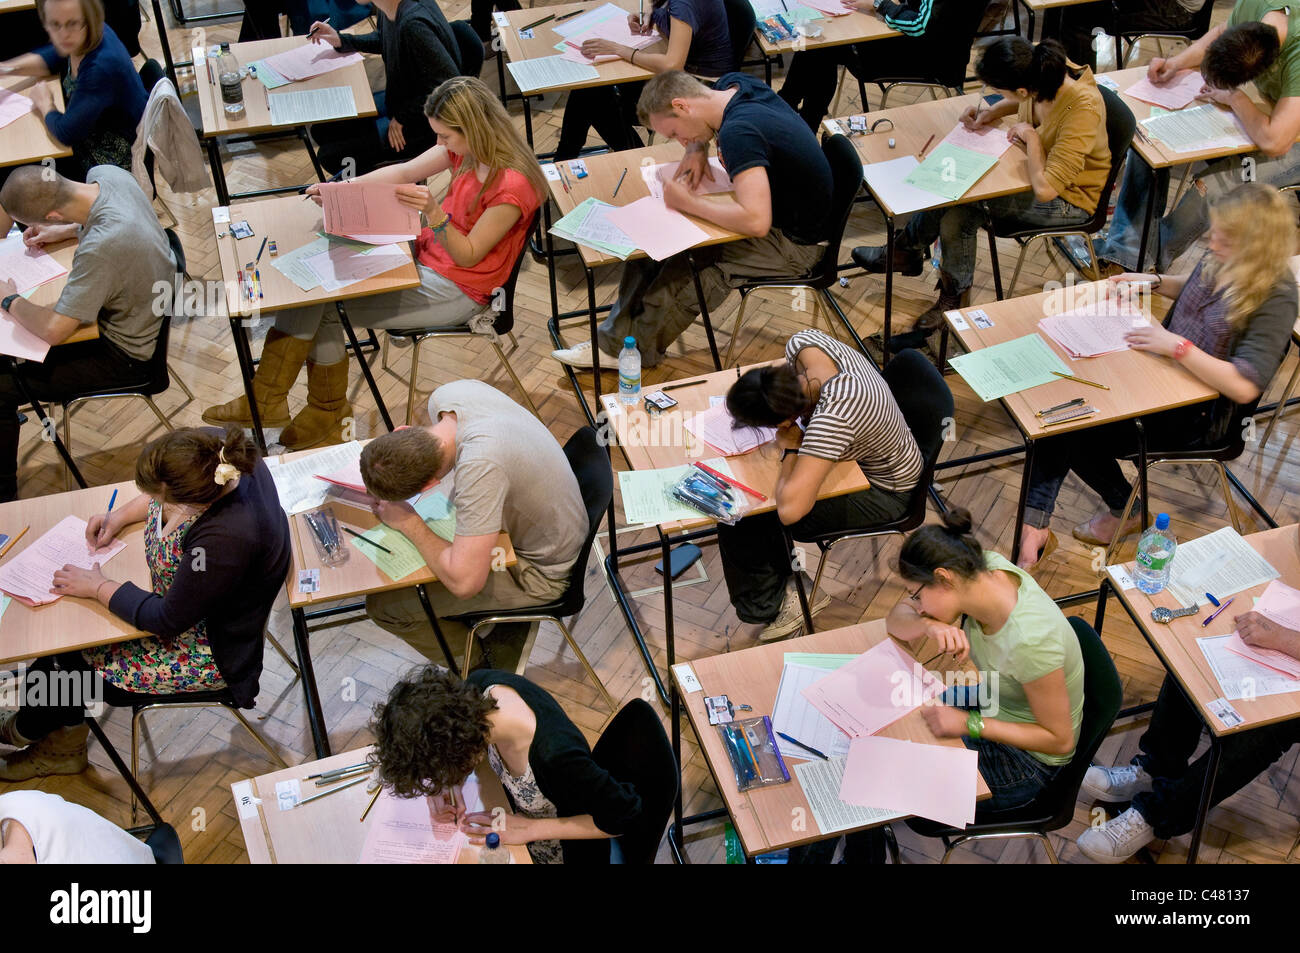 University students from King's College London, sitting exams Stock Photo